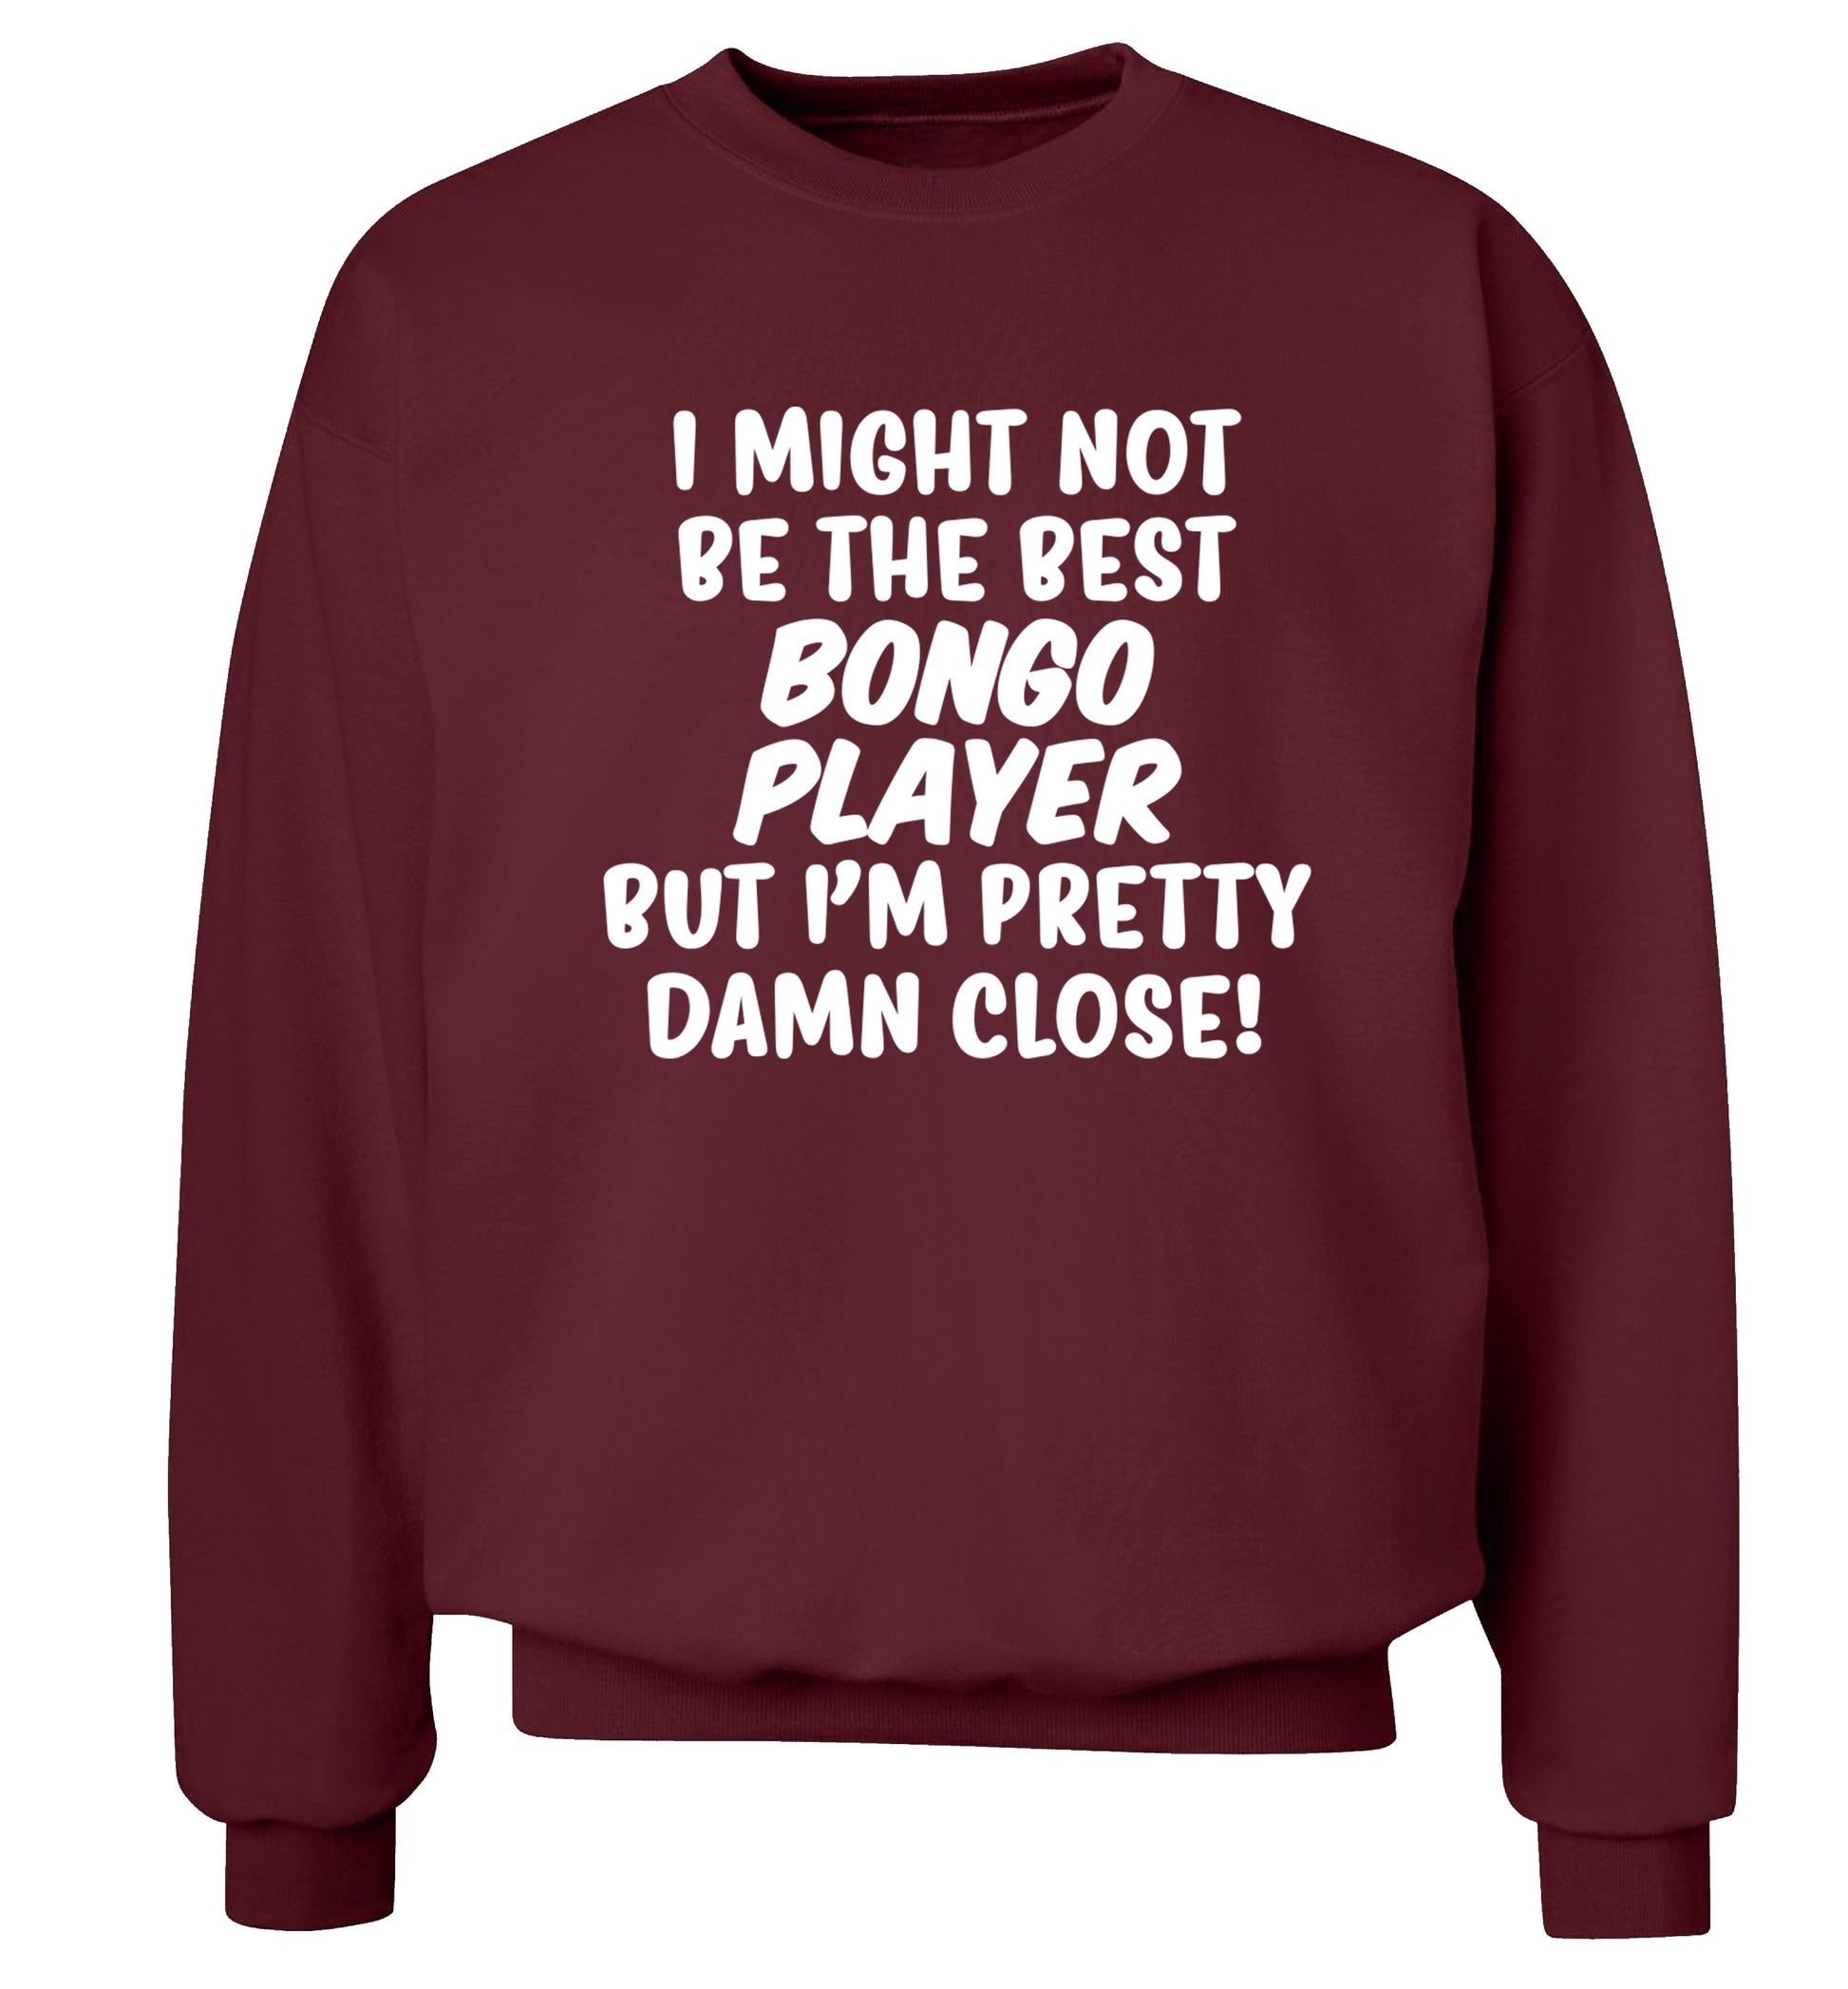 I might not be the best bongo player but I'm pretty close! Adult's unisexmaroon Sweater 2XL